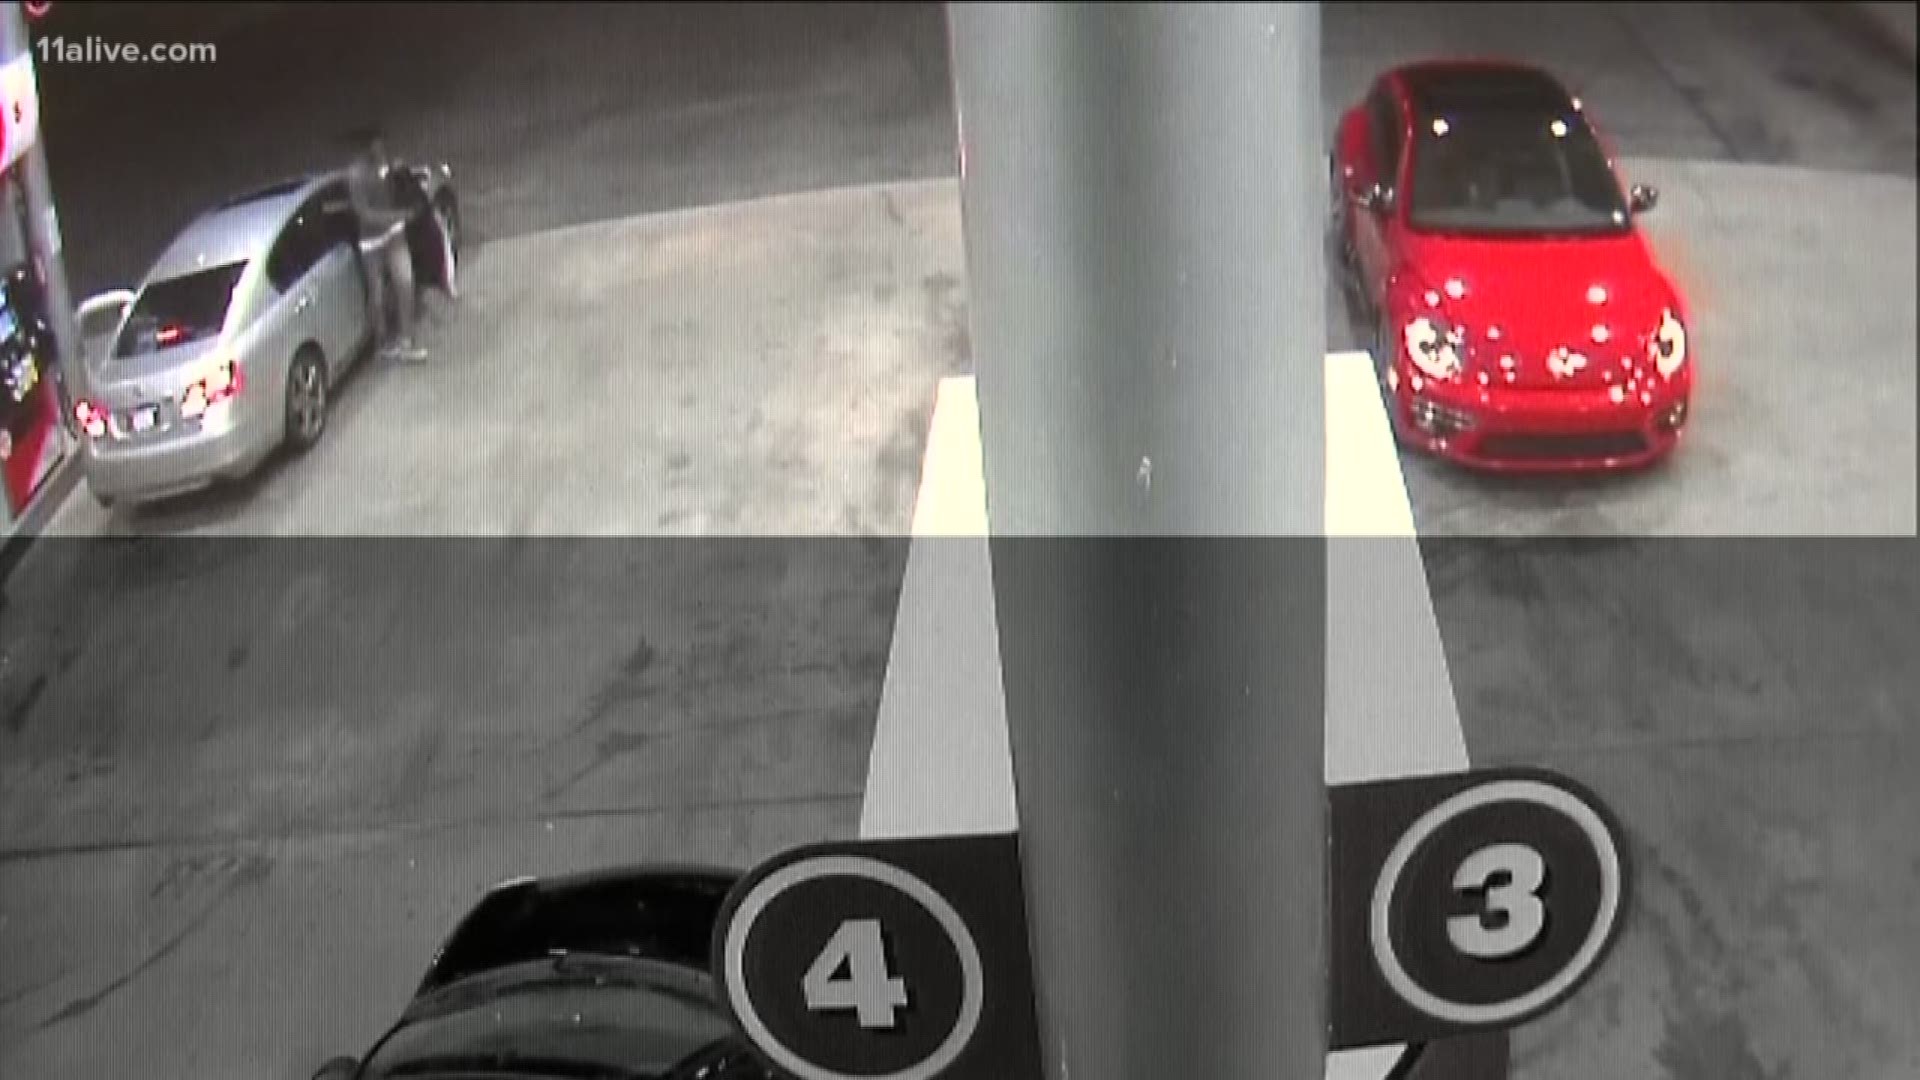 Police are looking for the suspect in this "slider crime," after a suspect slid into a car while the mother ran inside a gas station.